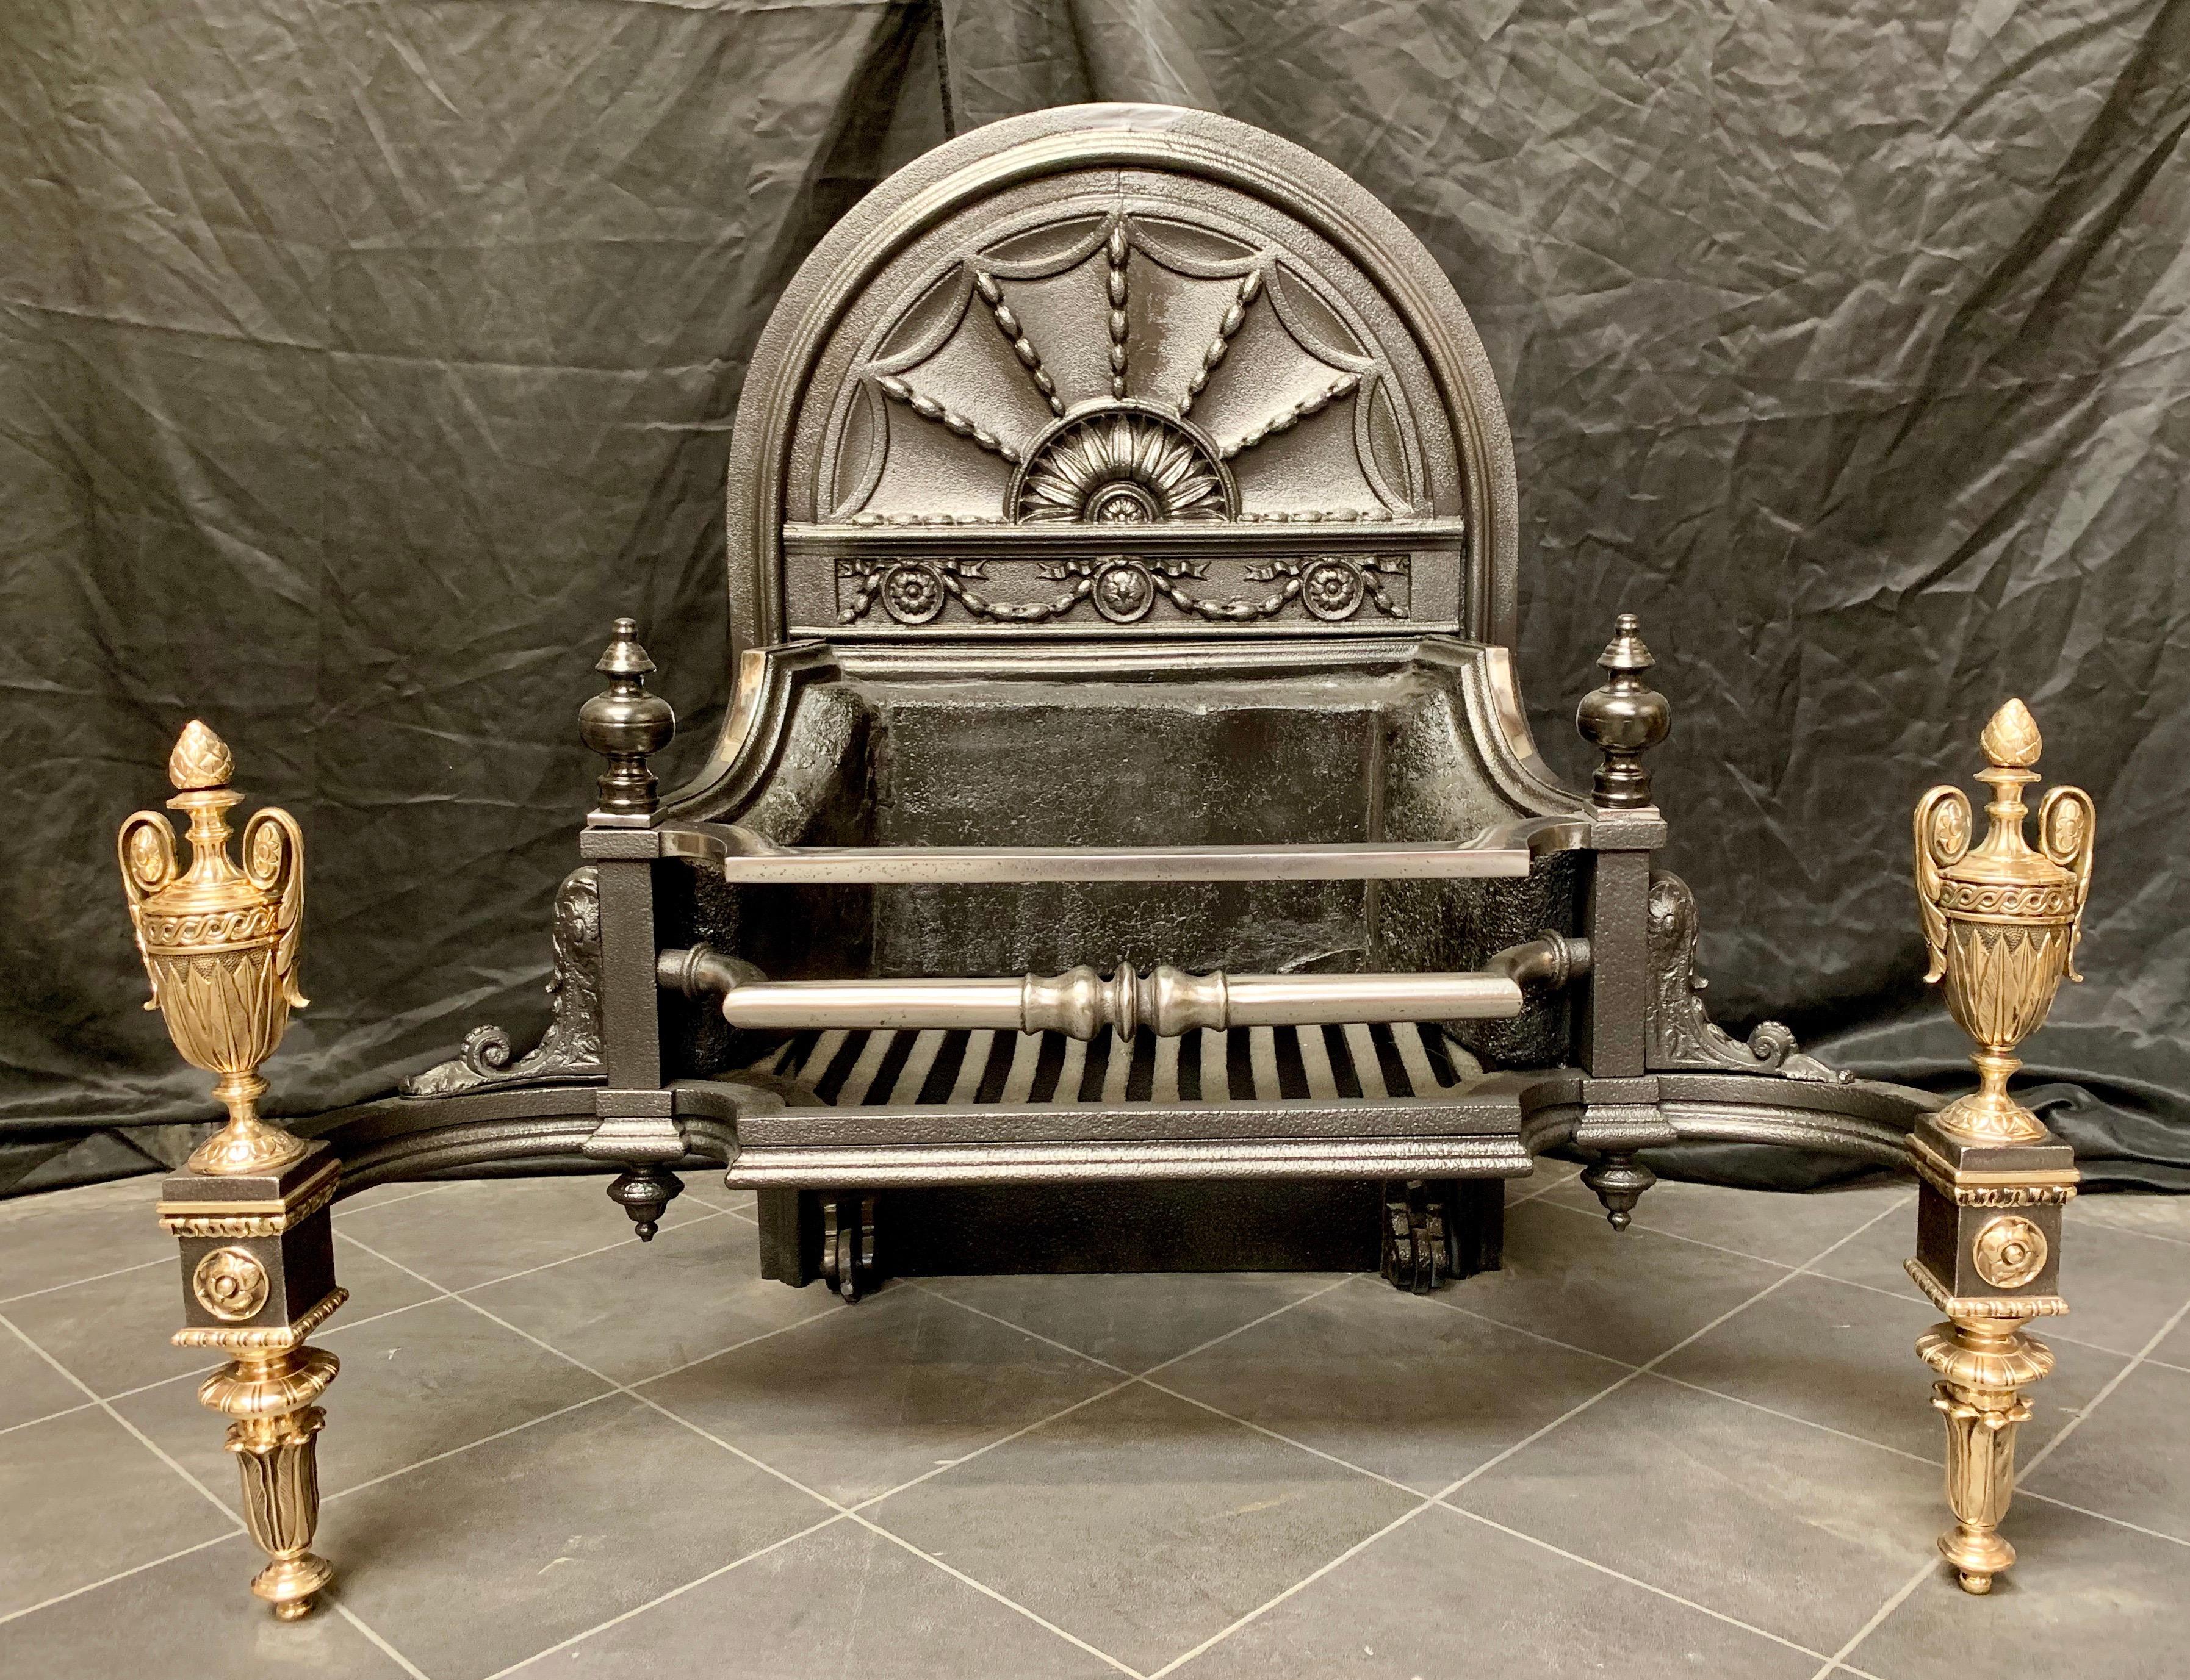 A large and elegant cast iron and bronze Victorian fire grate with a high arched sunburst fire back in the Georgian manner. The two barred polished grate is flanked by a pair of decorative cast shoulders capped by a pair of bobbin finials. The whole